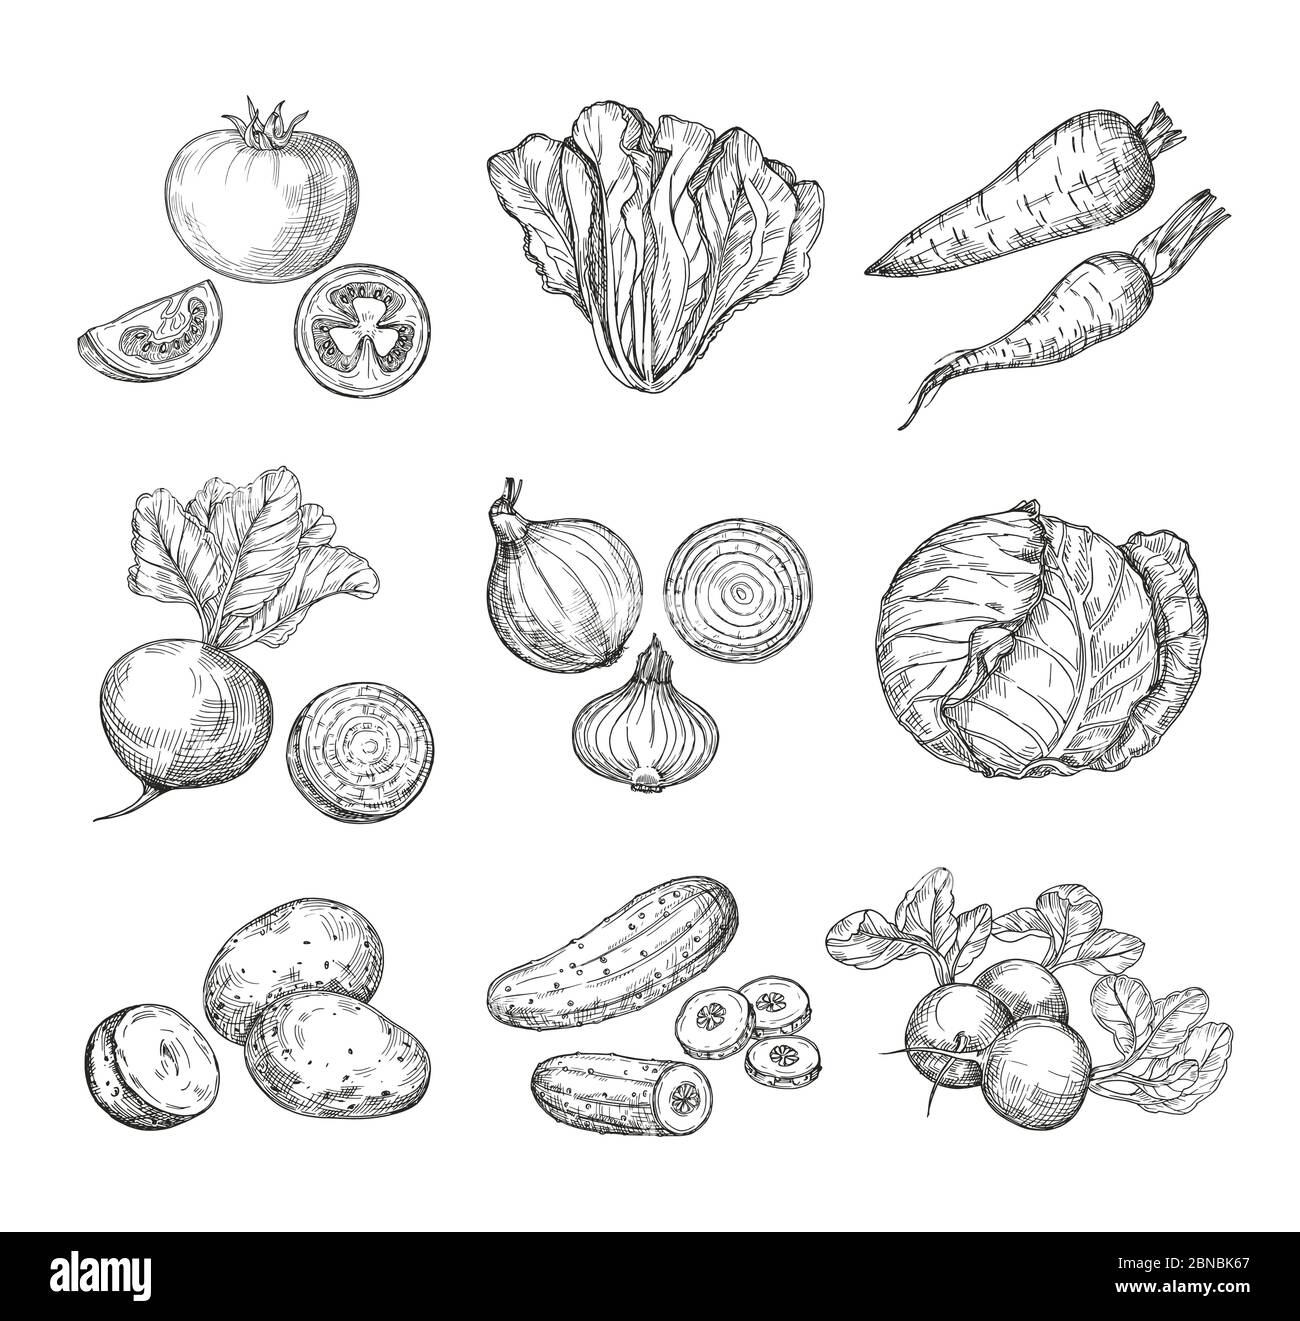 Sketch vegetables. Fresh tomato, cucumber and carrots, potatoes. Hand drawn onions, radish and cabbage. Garden vegetable vector set of tomato and potato, organic fresh food illustration Stock Vector